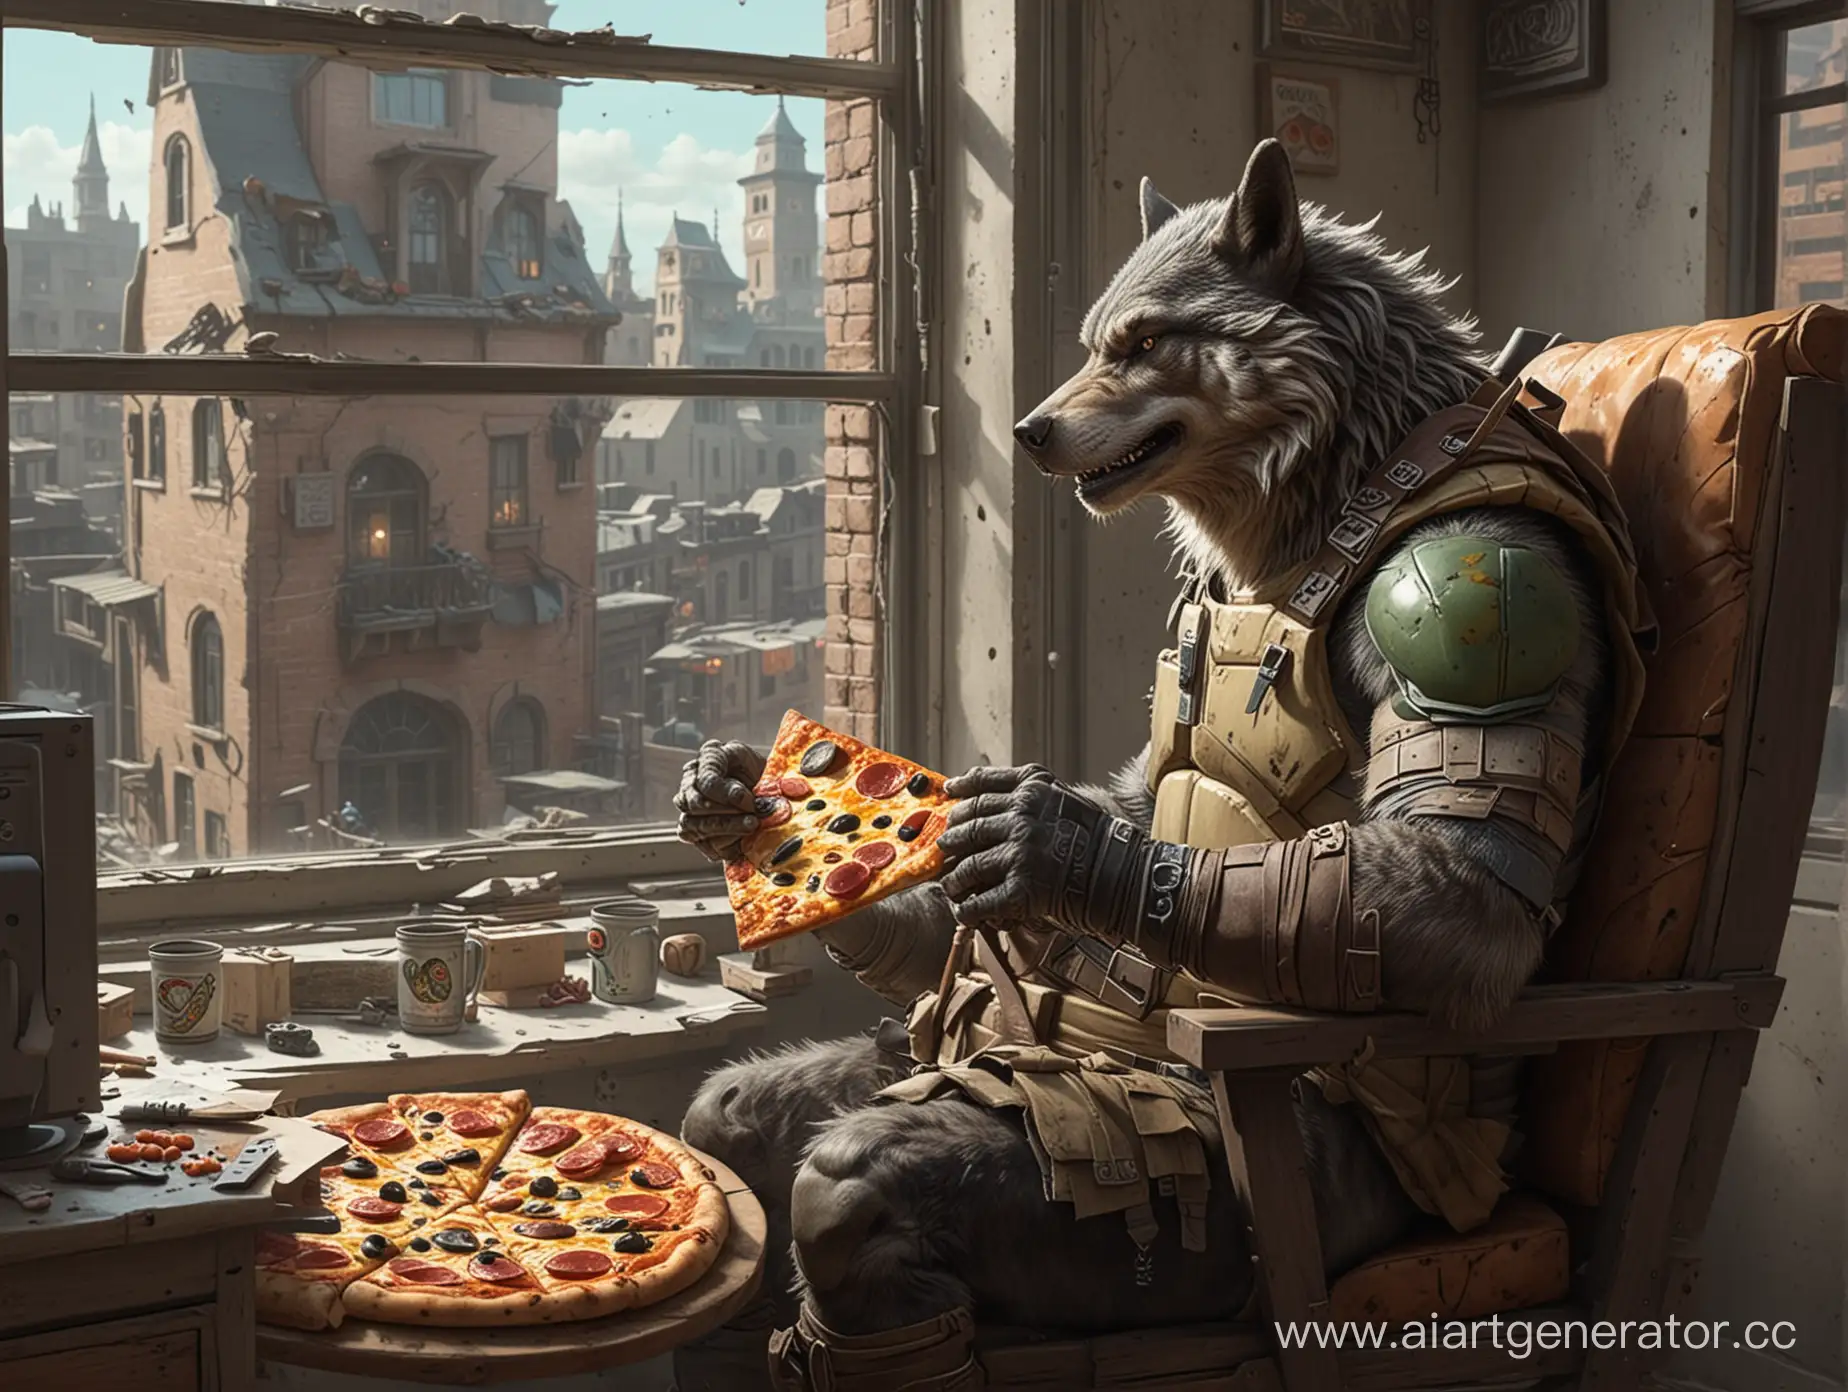 Postmodern-Scene-Grizzled-Wolf-Gaming-while-Ninja-Turtle-Offers-Pizza